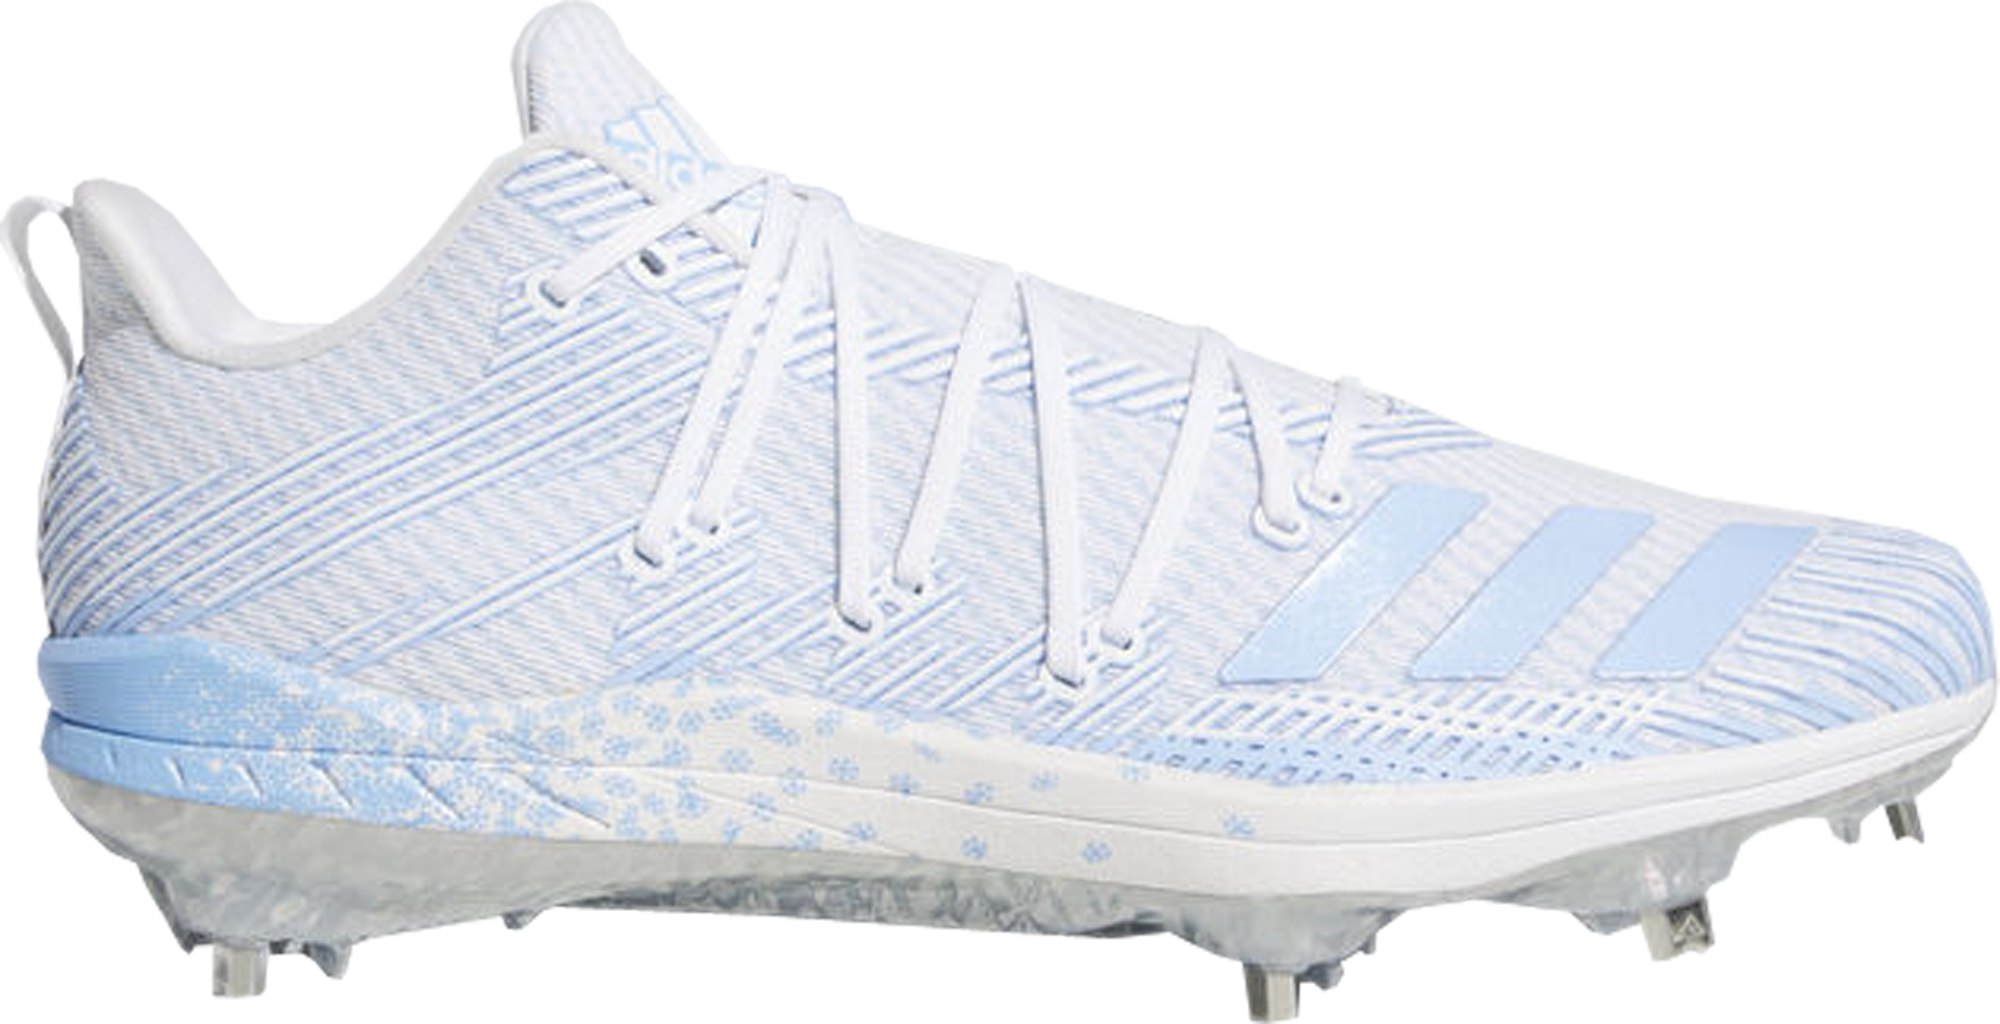 adidas iced out cleats